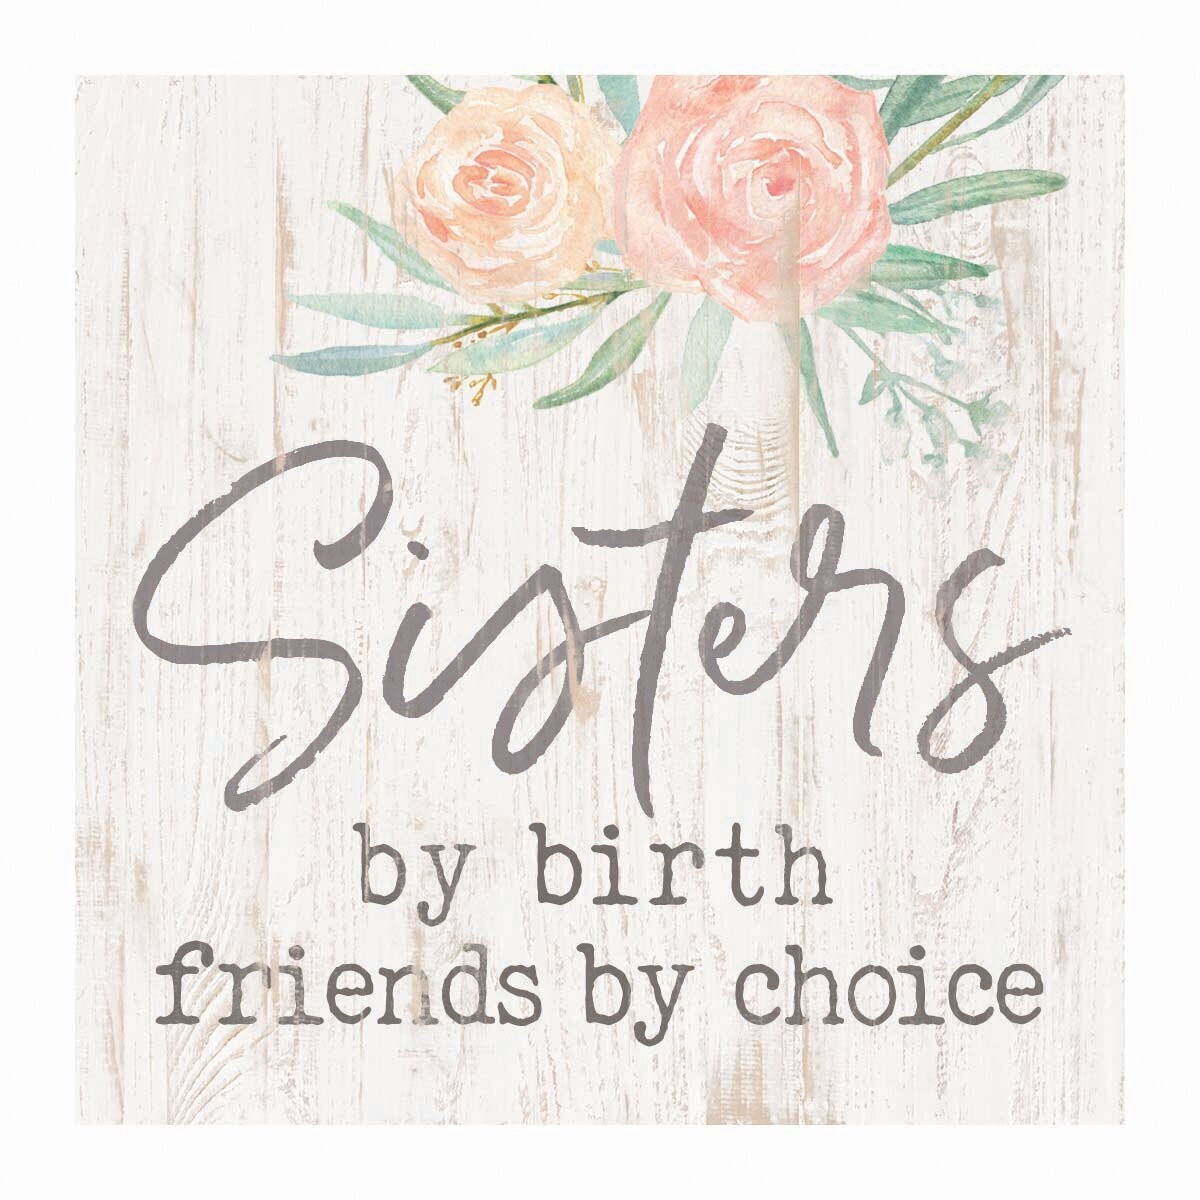 Wood Word Block Sign Small - Sisters by birth, friends by choice - 3x3 inches - P.G. Dunn